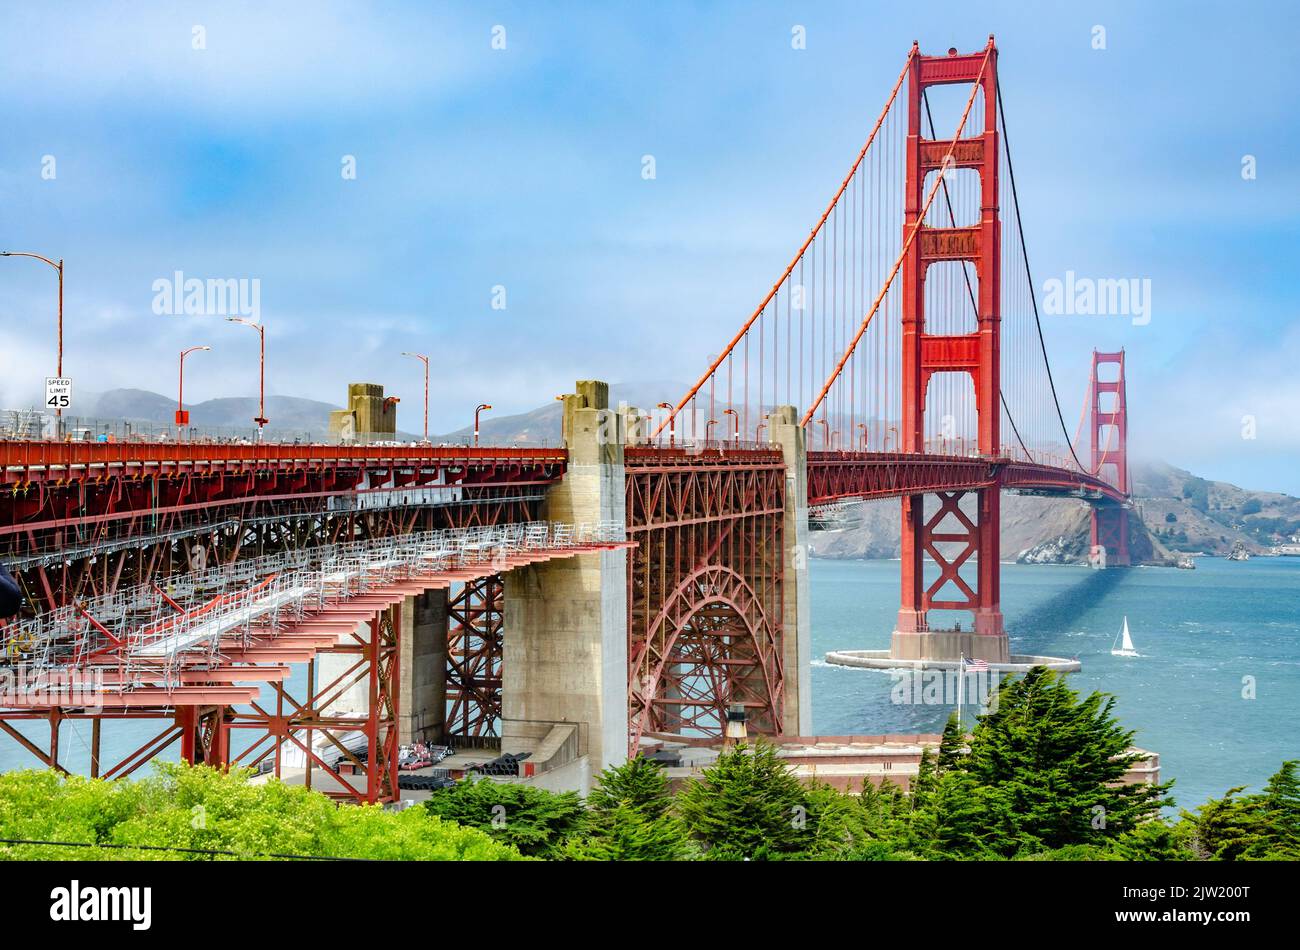 The Golden Gate Bridge in San Francisco, California is an iconic landmark and tourist attraction. Stock Photo